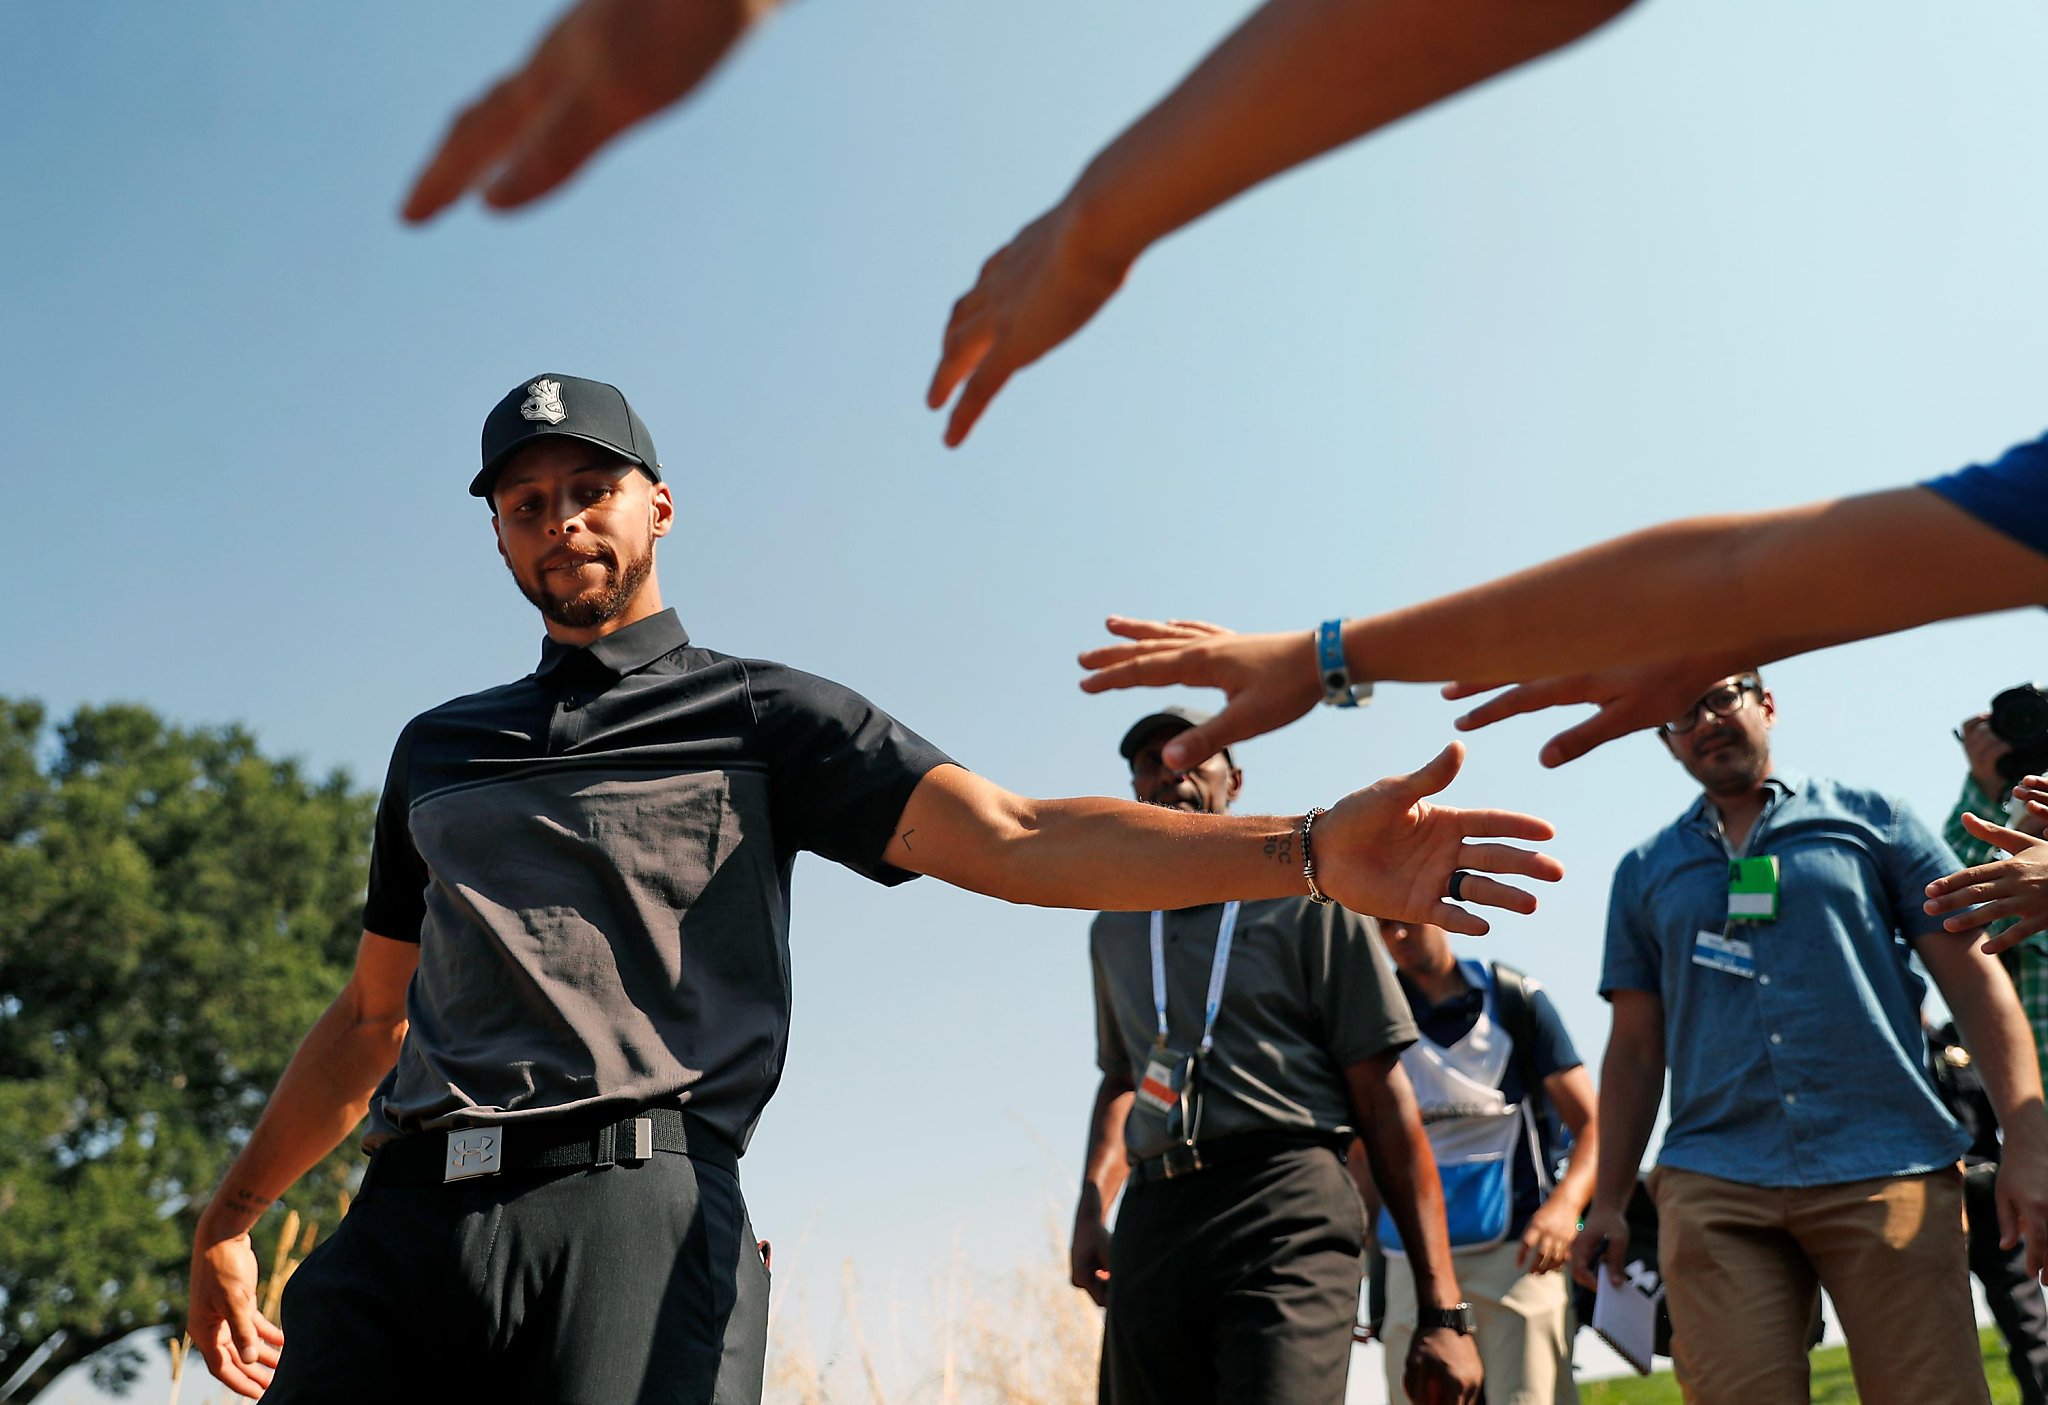 2 years after bringing the program back, Stephen Curry, Howard Golf team  continue thriving through Pebble Beach event - ABC7 San Francisco